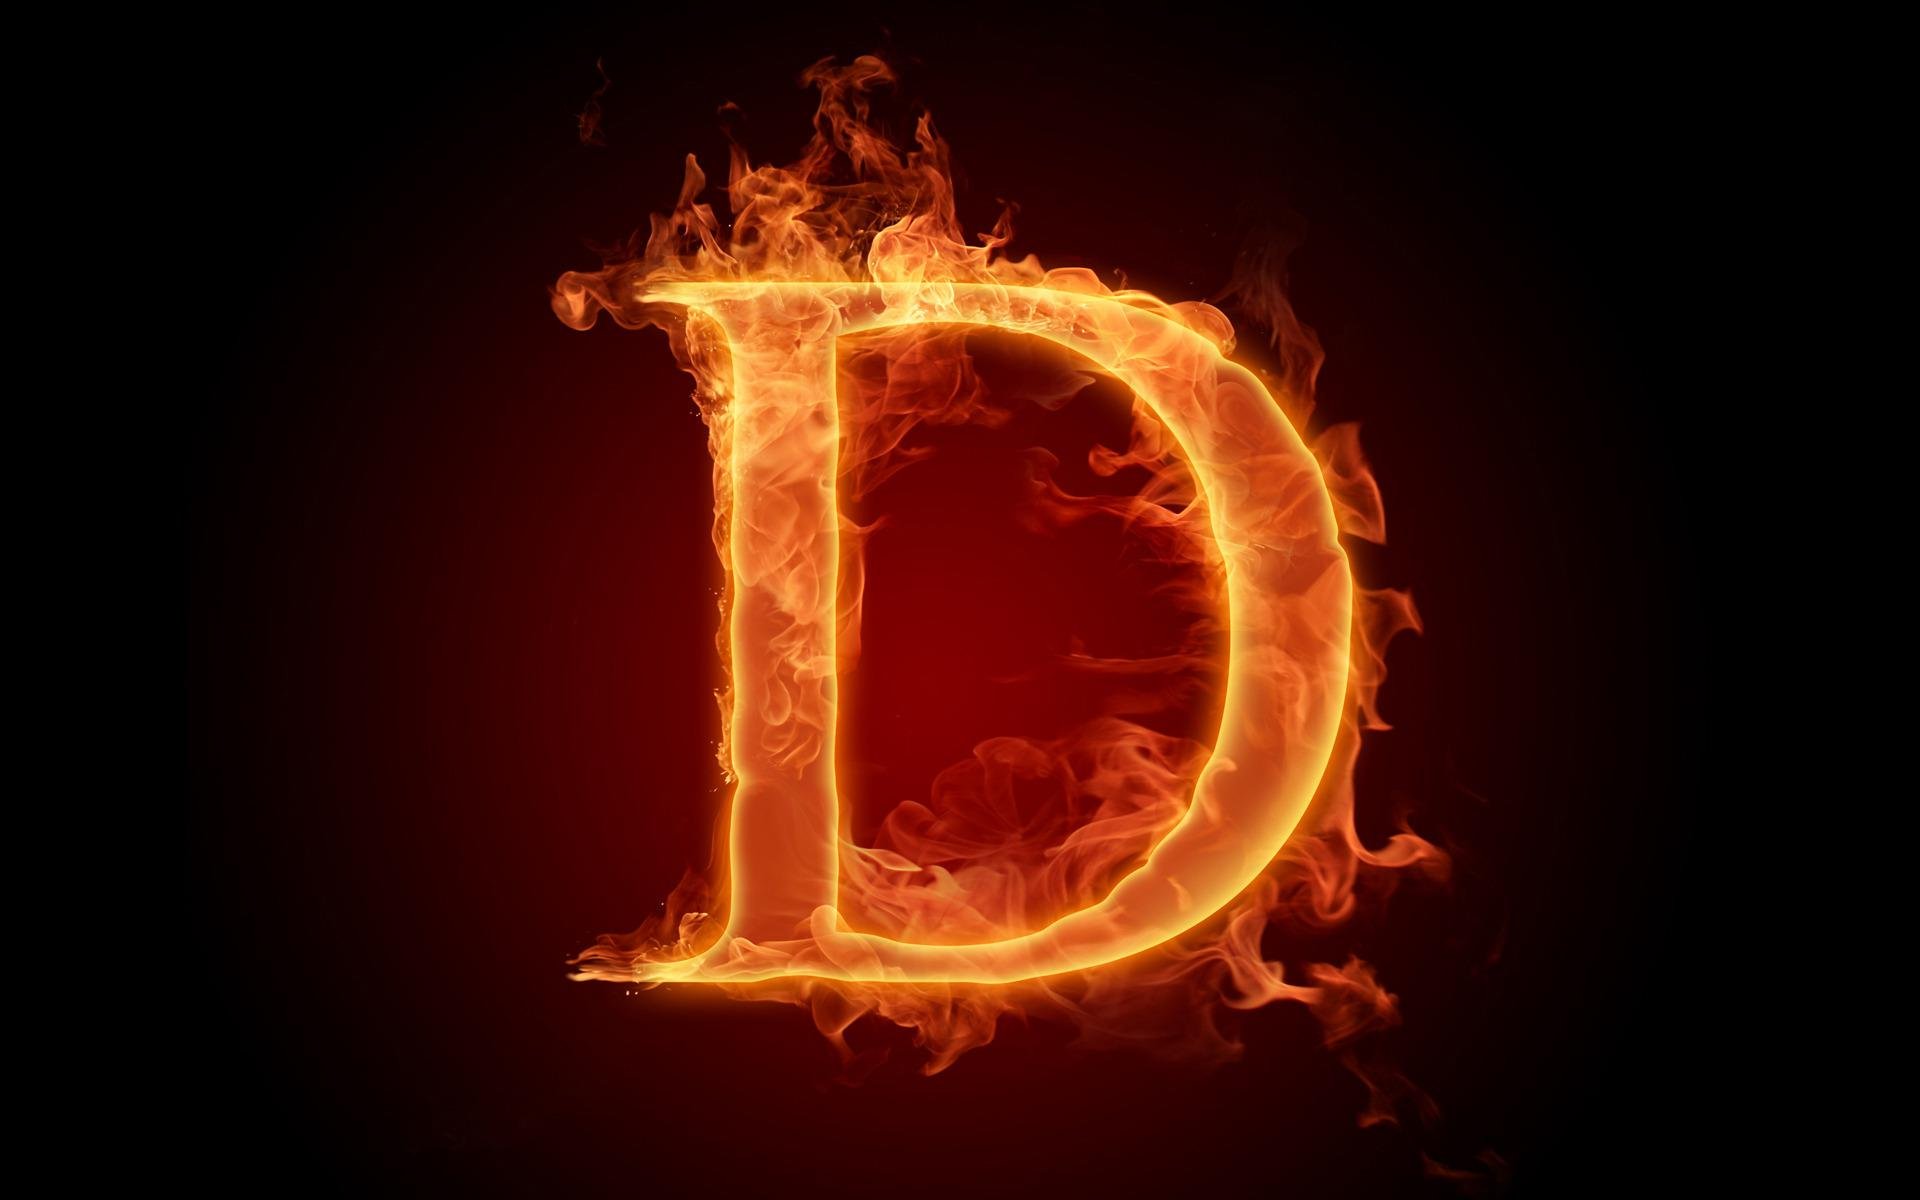 the fiery english alphabet picture d, 1920x1200 Wallpaper